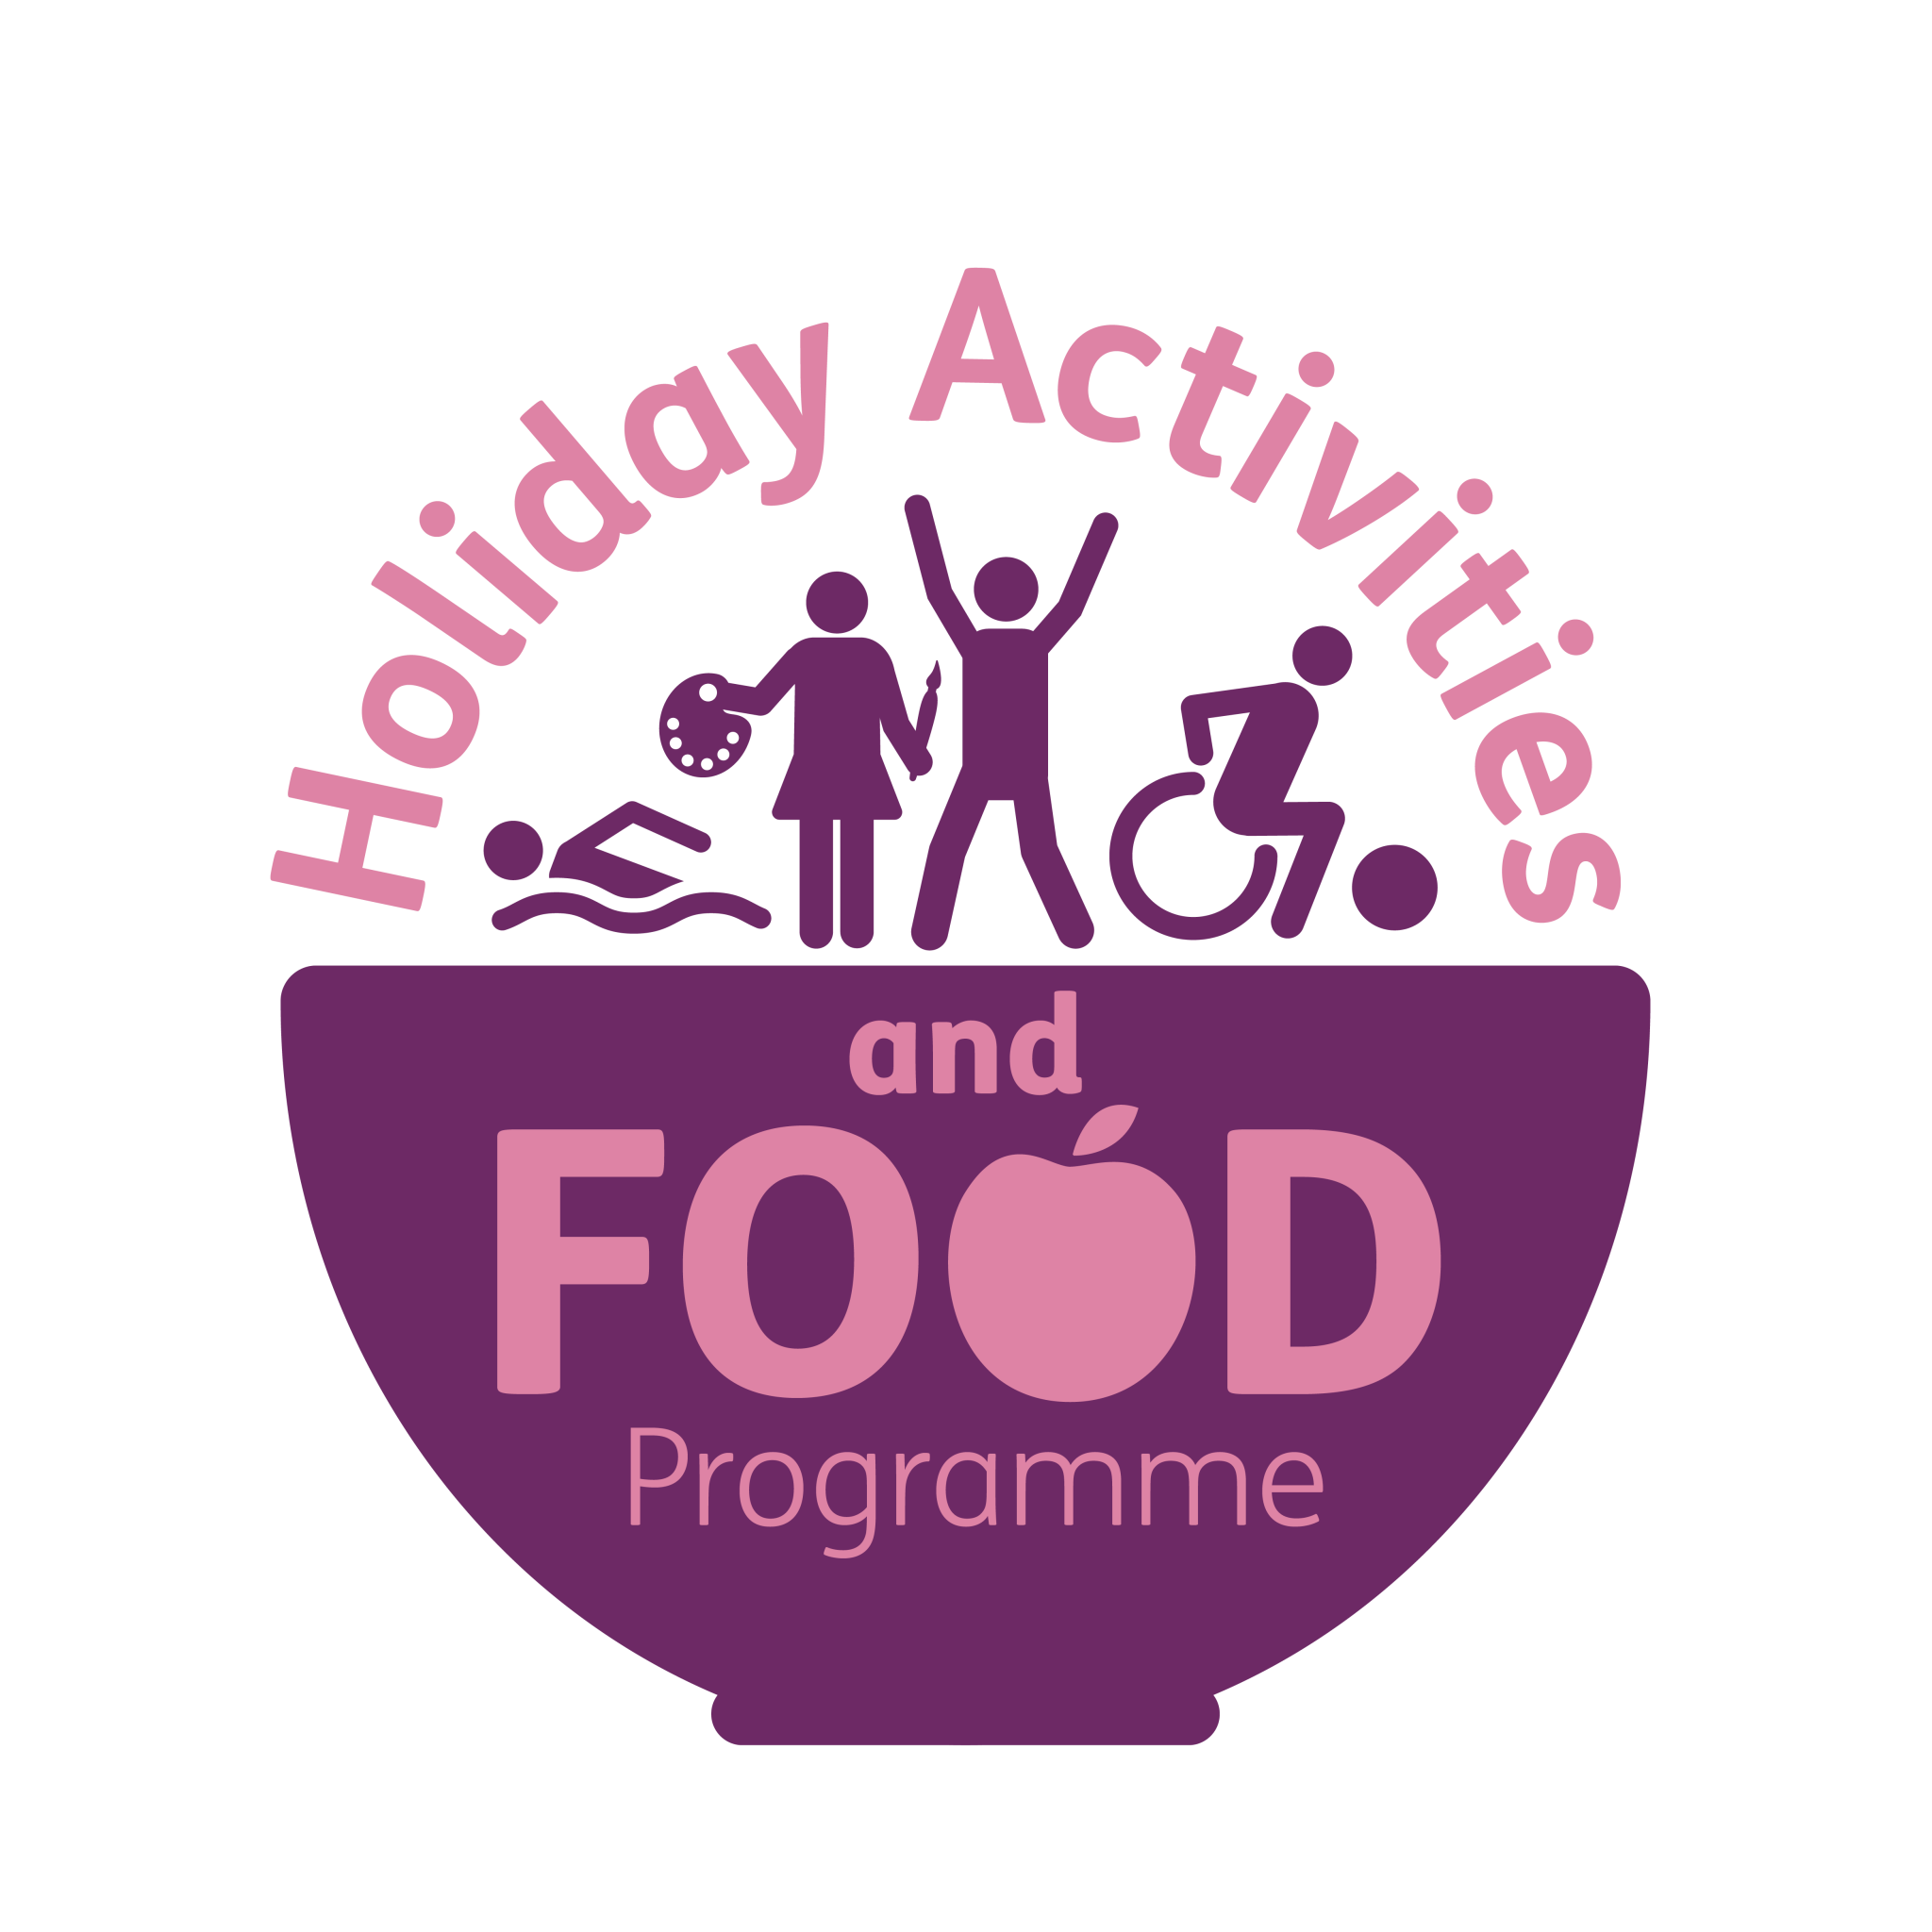 Holiday Activities and Food Programme One YMCA